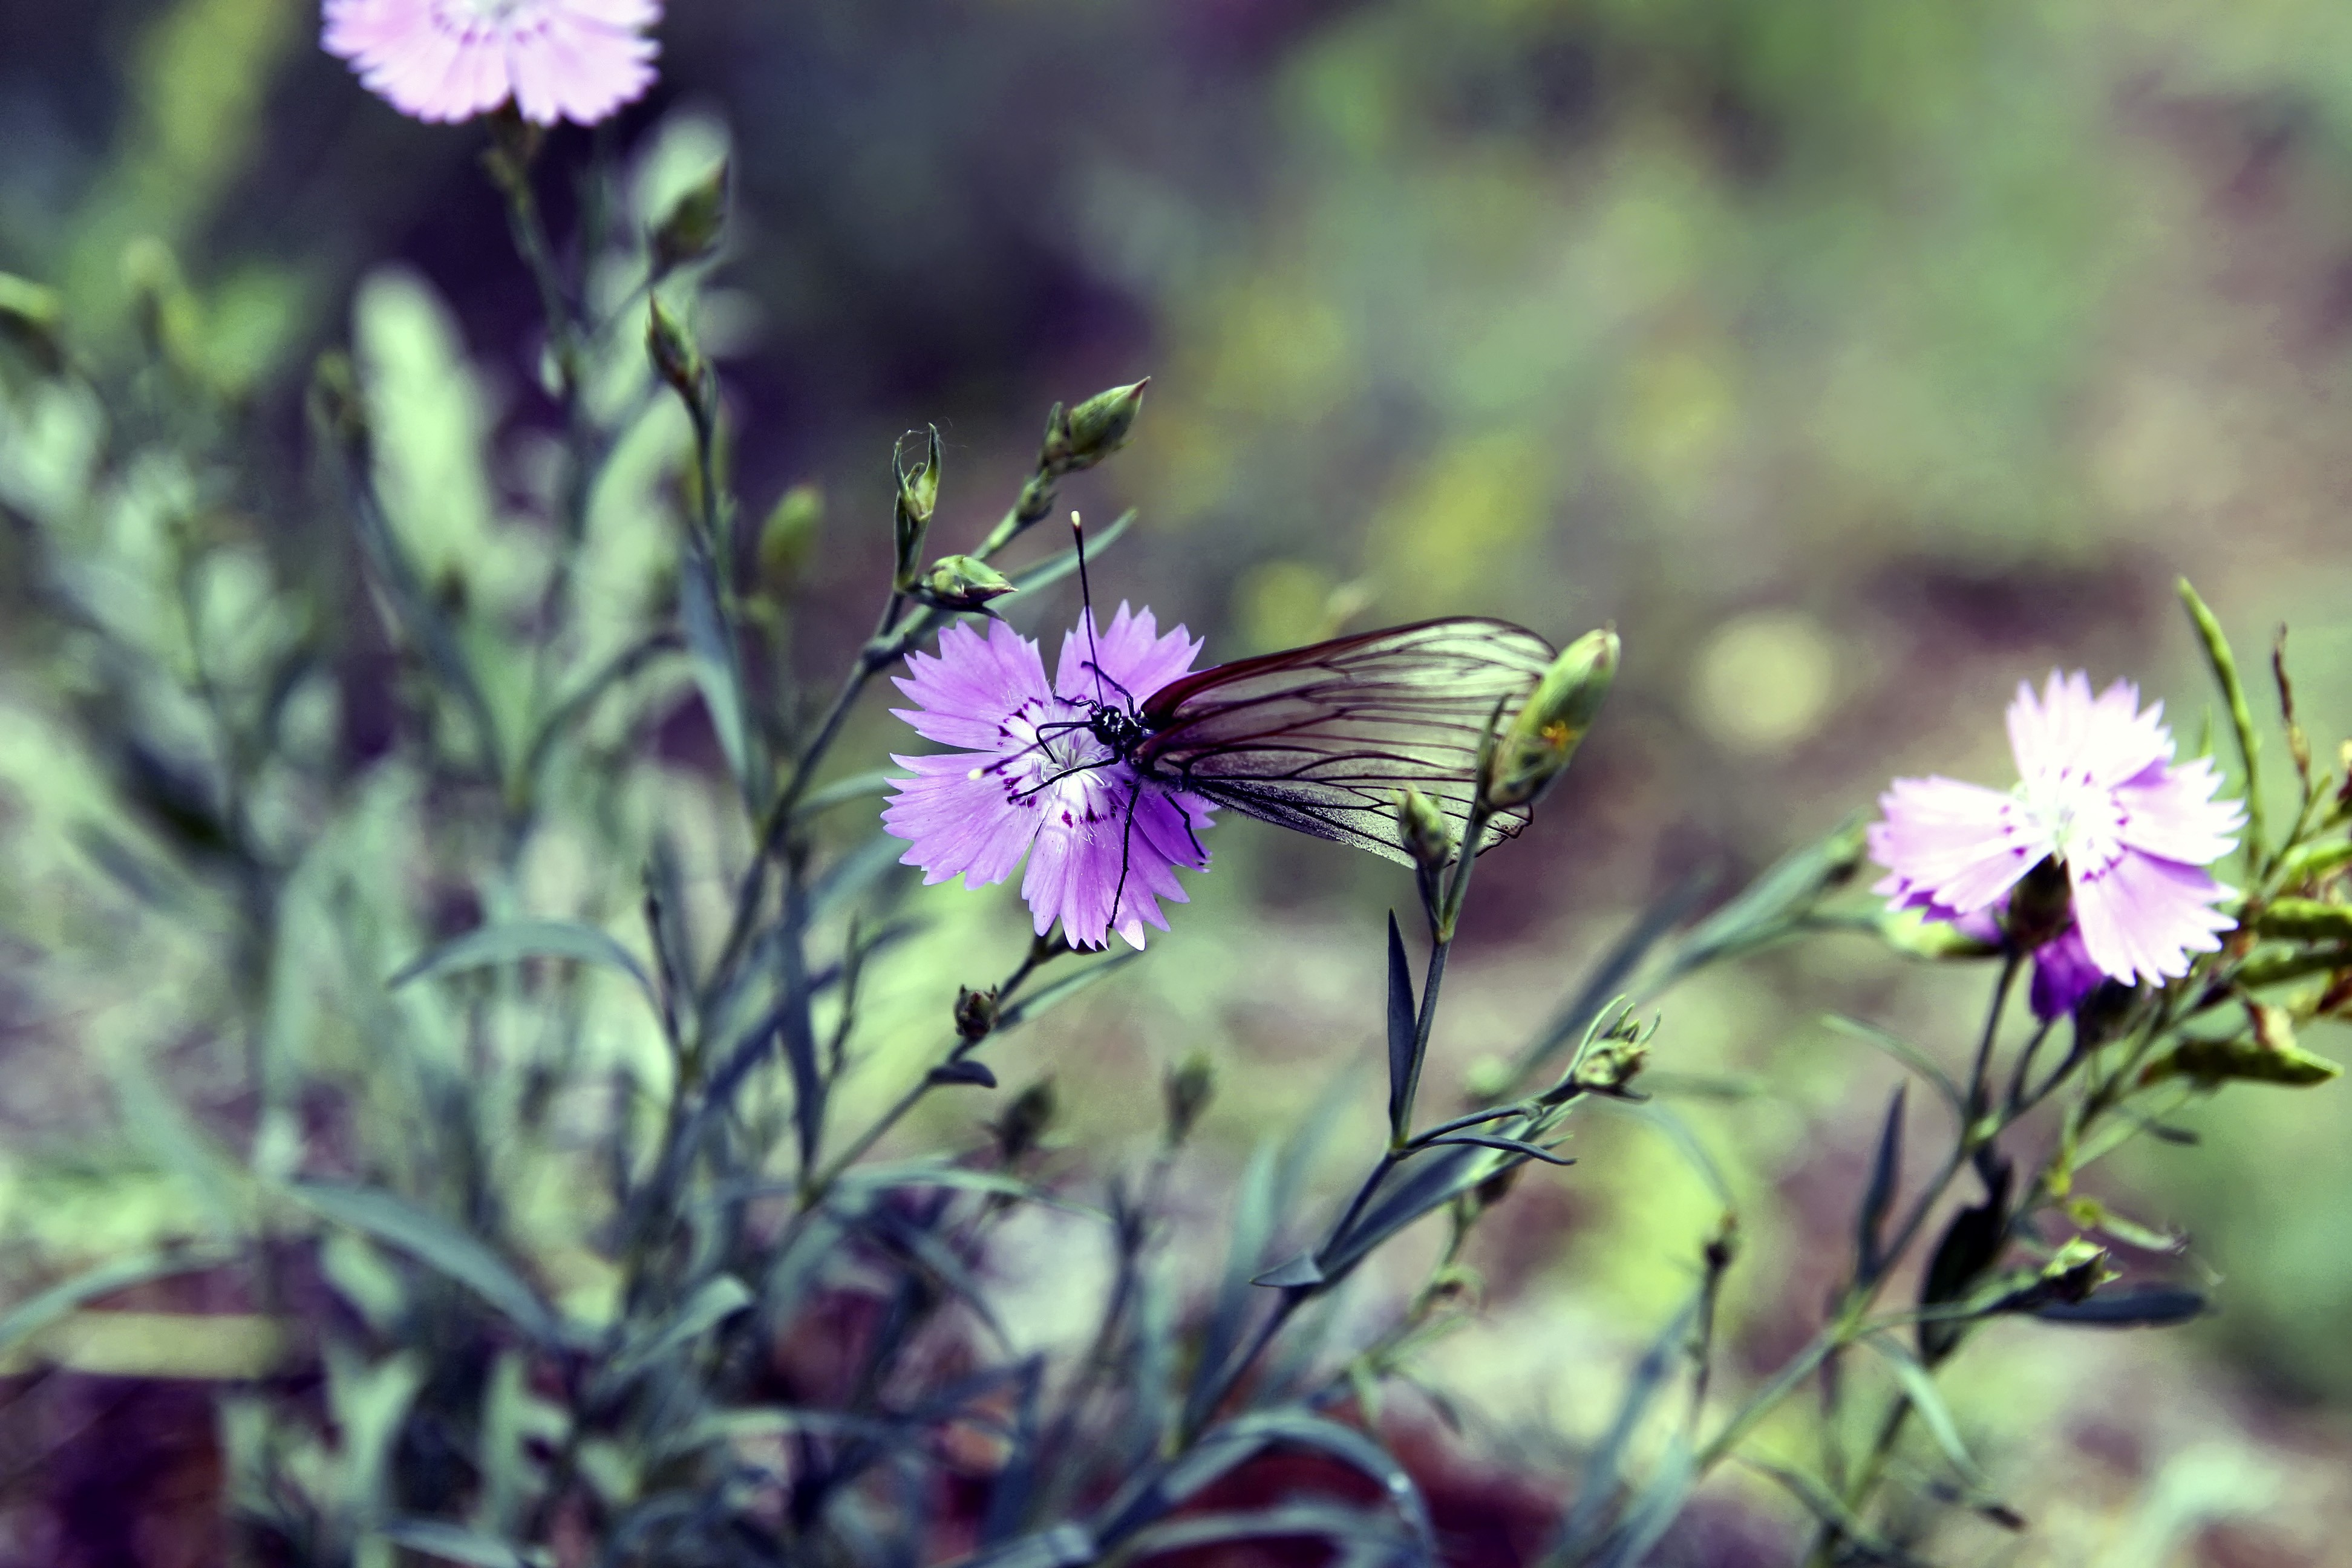 General 3888x2592 nature butterfly flowers depth of field purple flowers insect animals plants